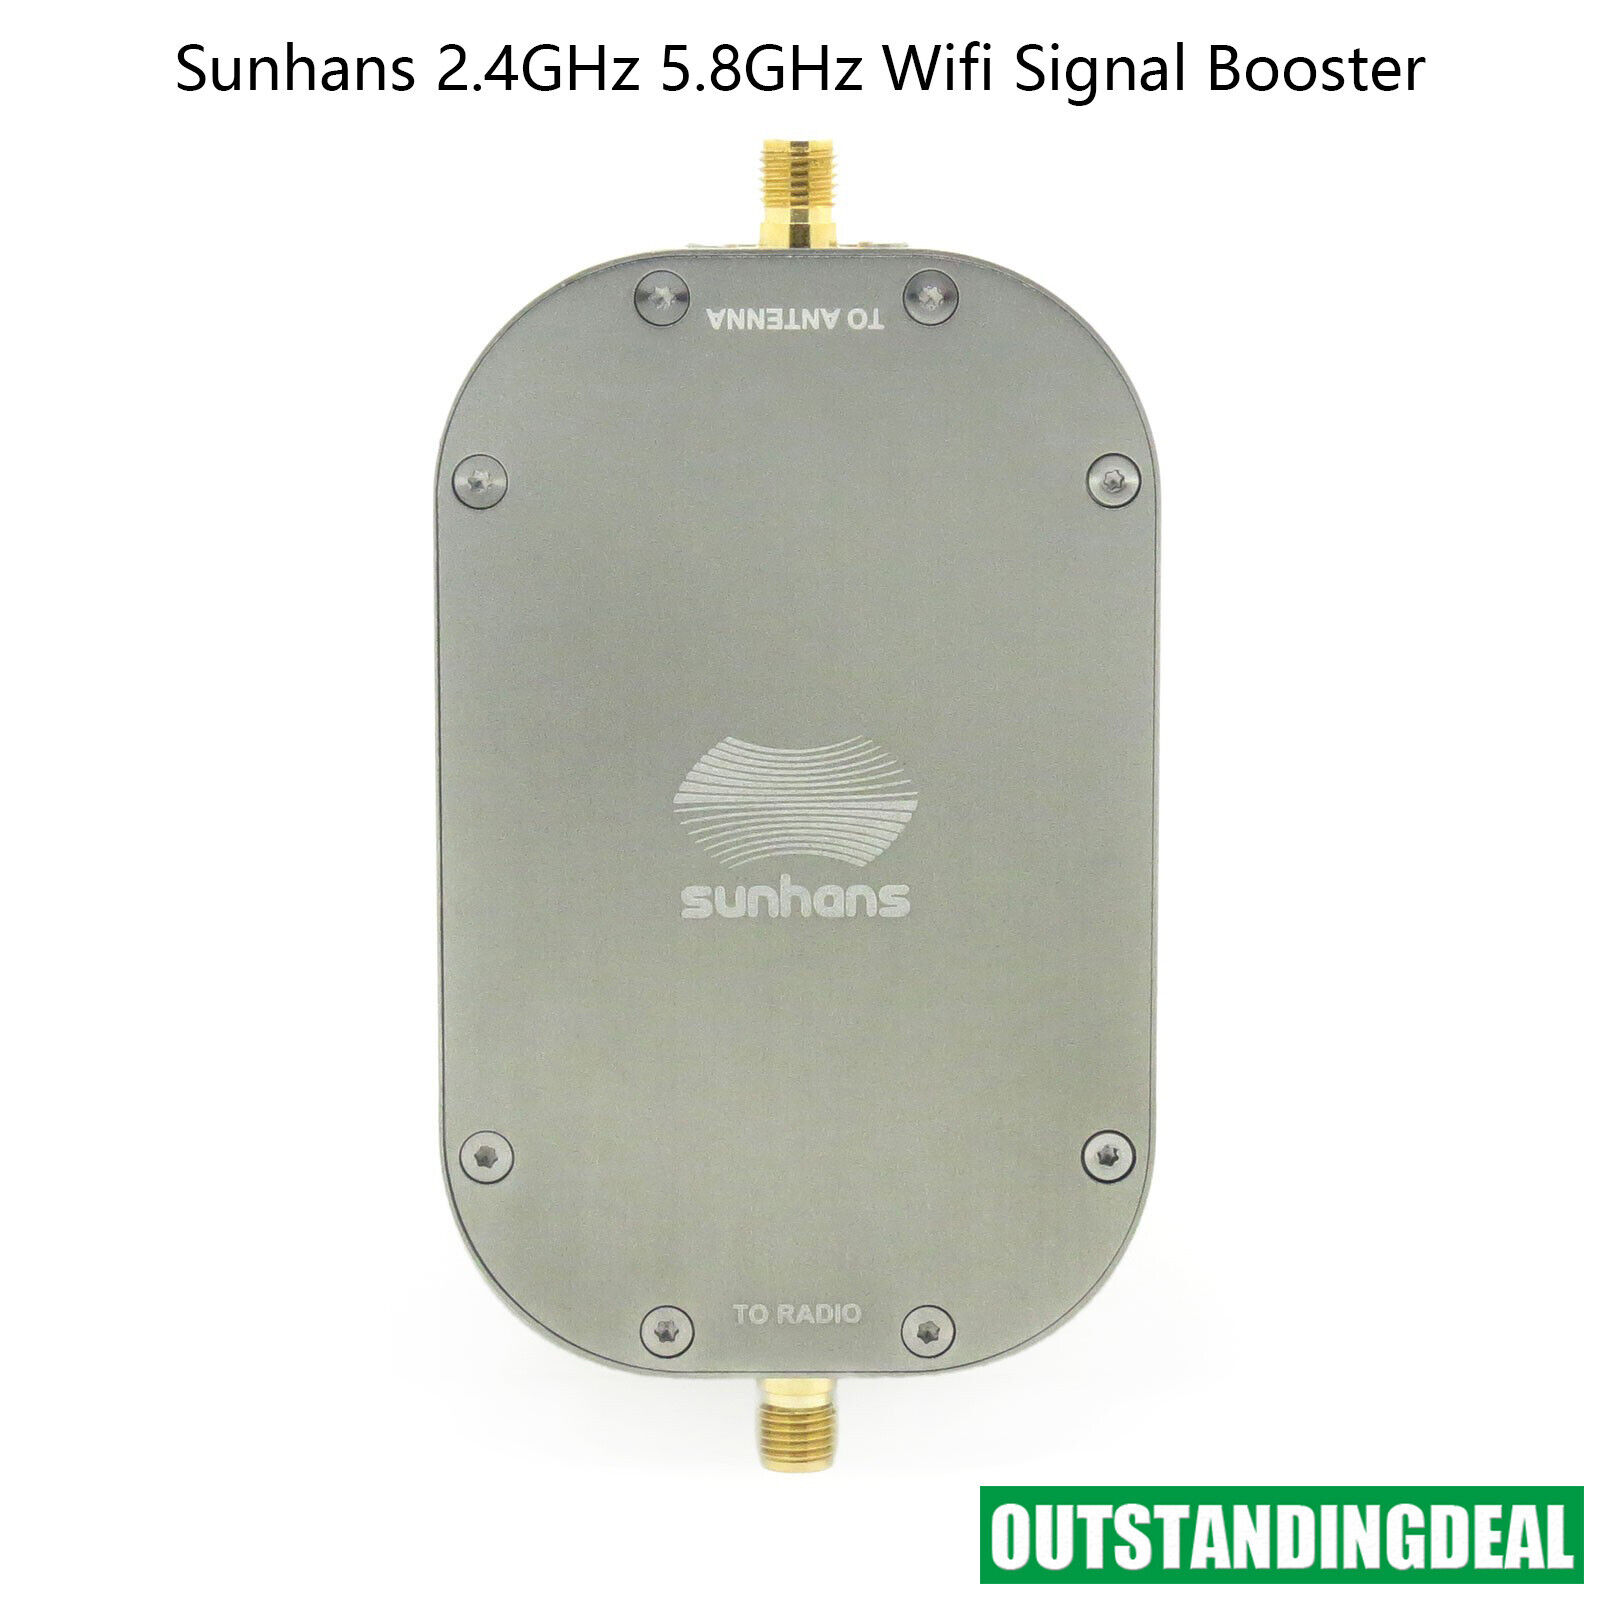 Sunhans 2.4GHz 5.8GHz Wifi Signal Booster for Model aeroplanes Drones ot25